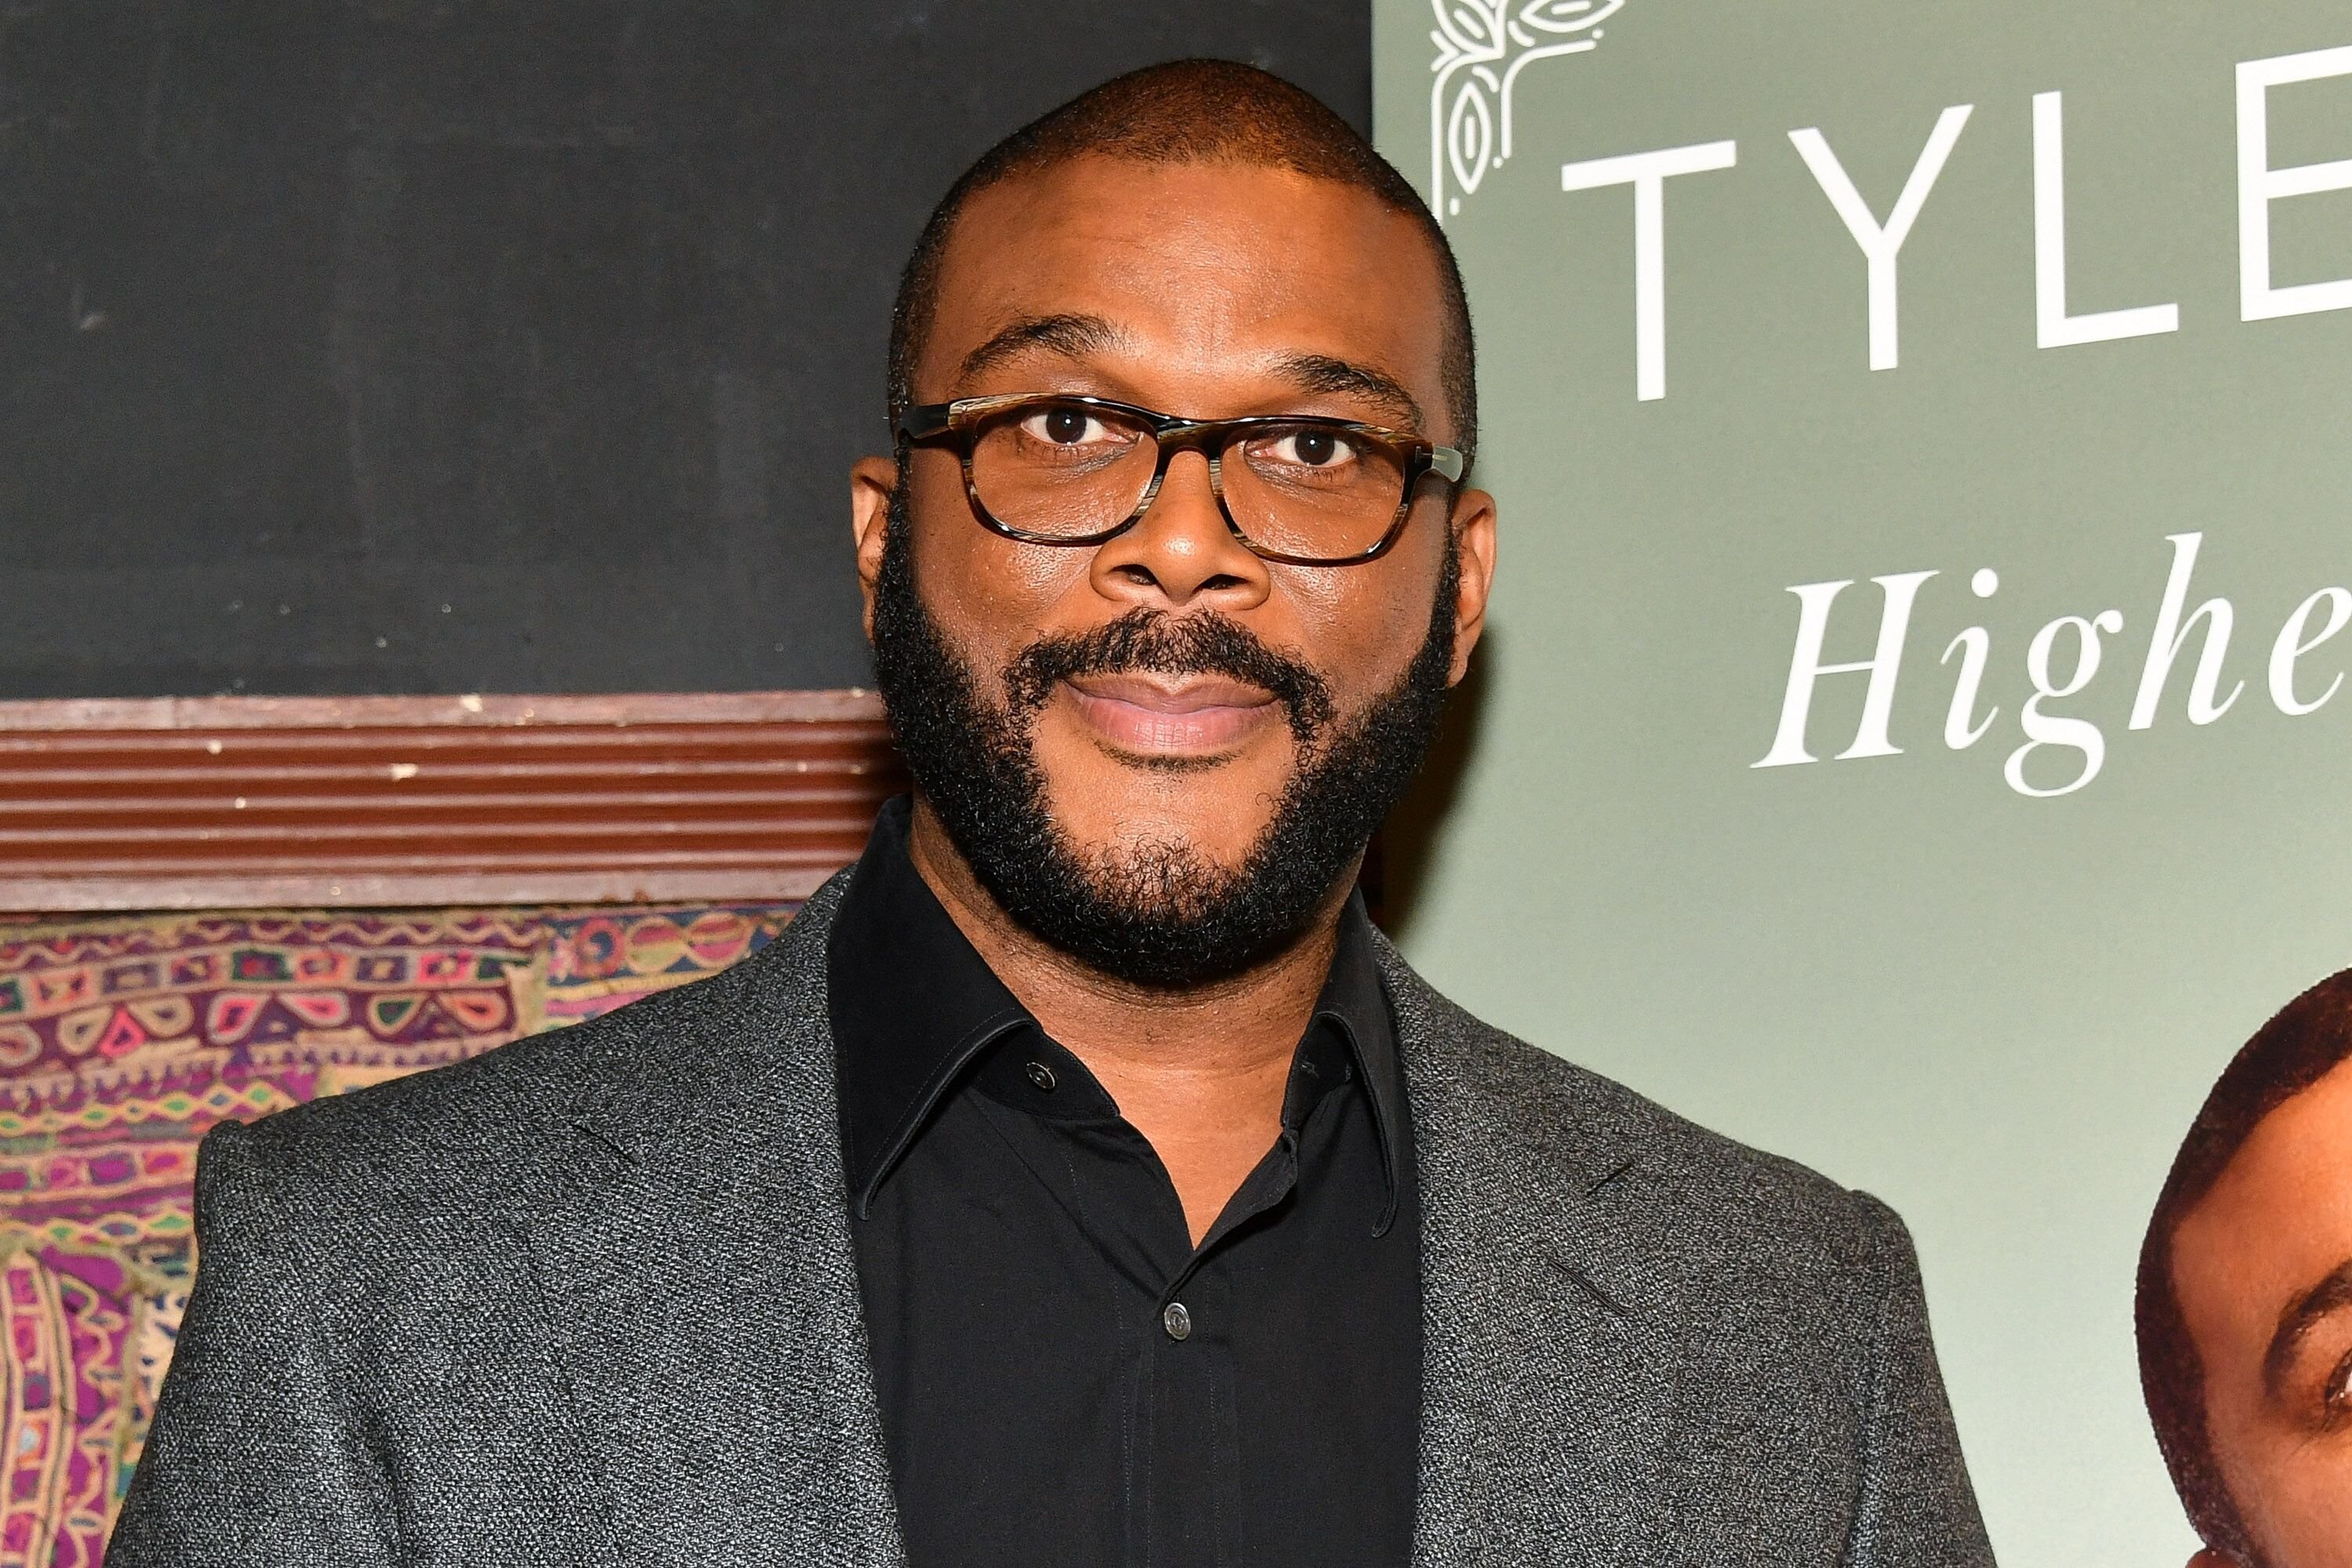 Tyler Perry launches his new book "Higher Is Waiting" at the Gramercy Theatre on November 14, 2017 | Photo: Getty Images